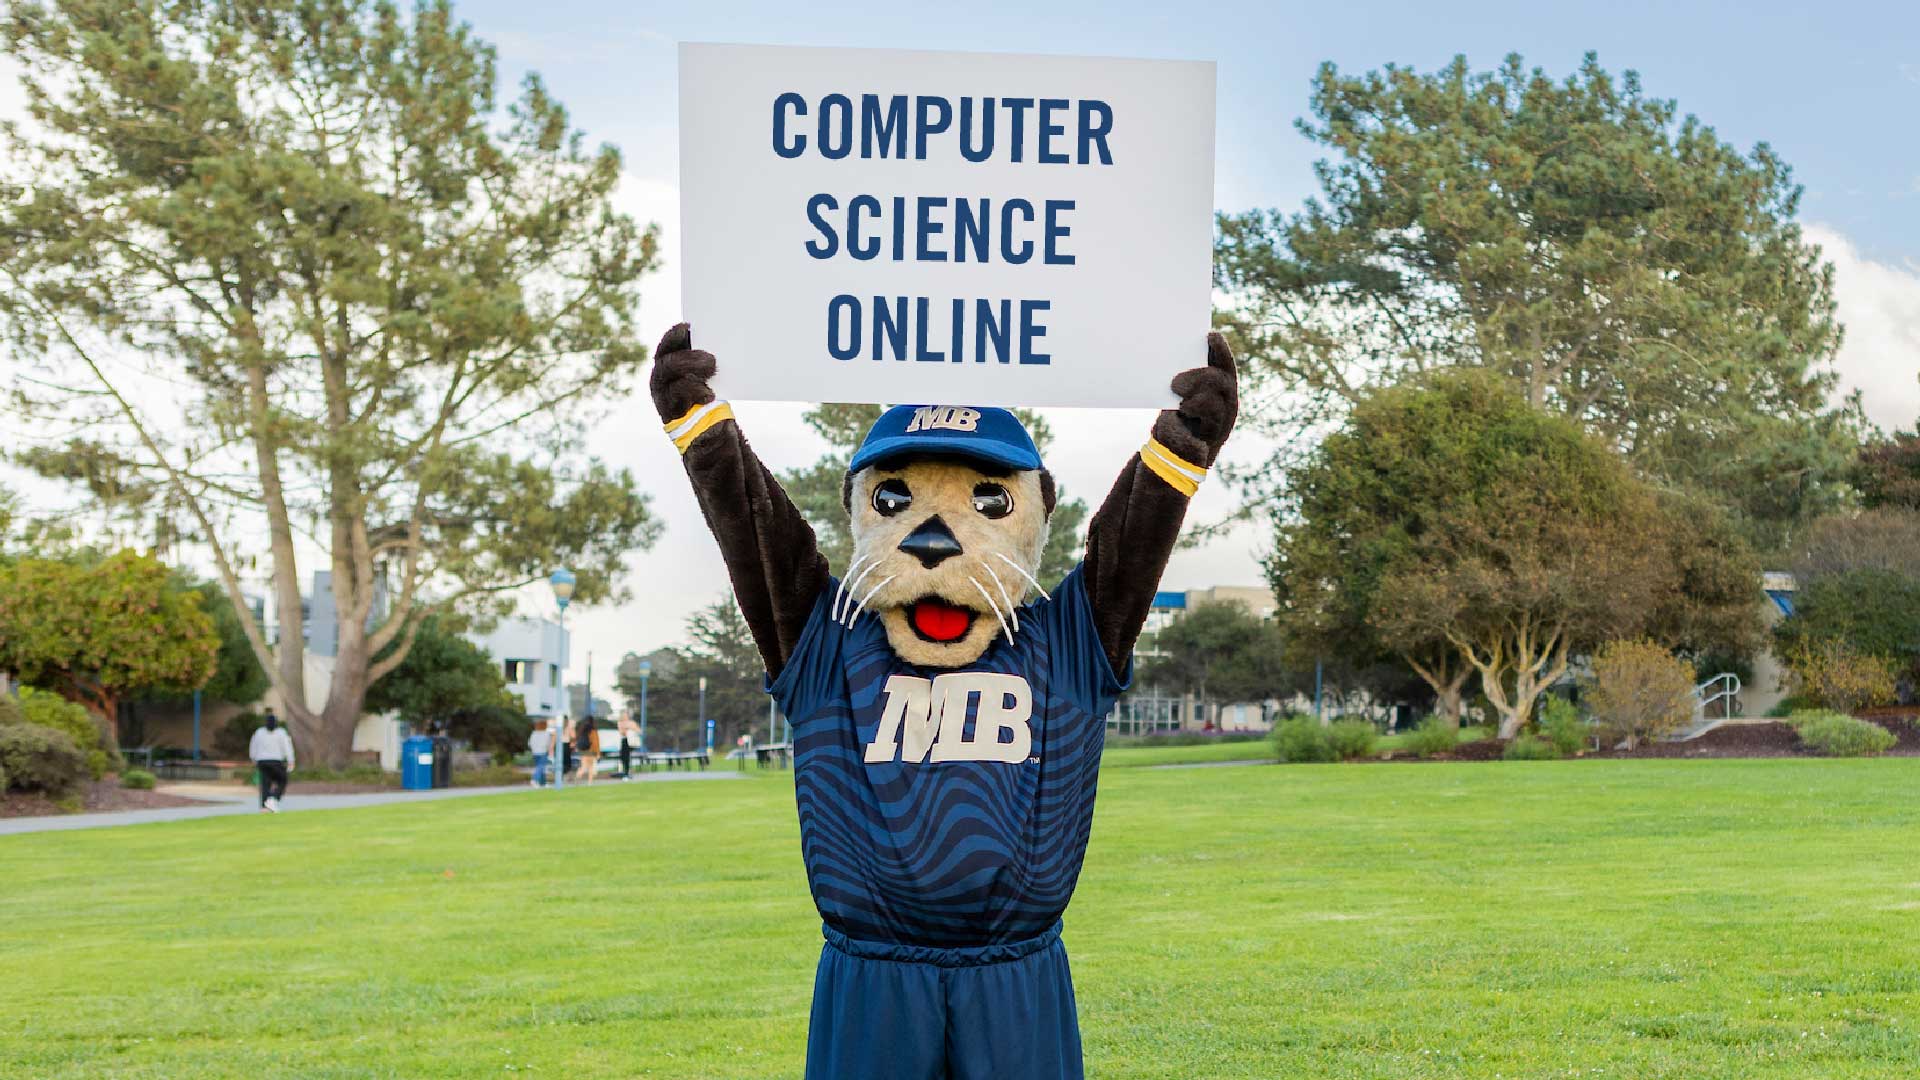 Mascot, Monte Ray holding Computer Science Online sign